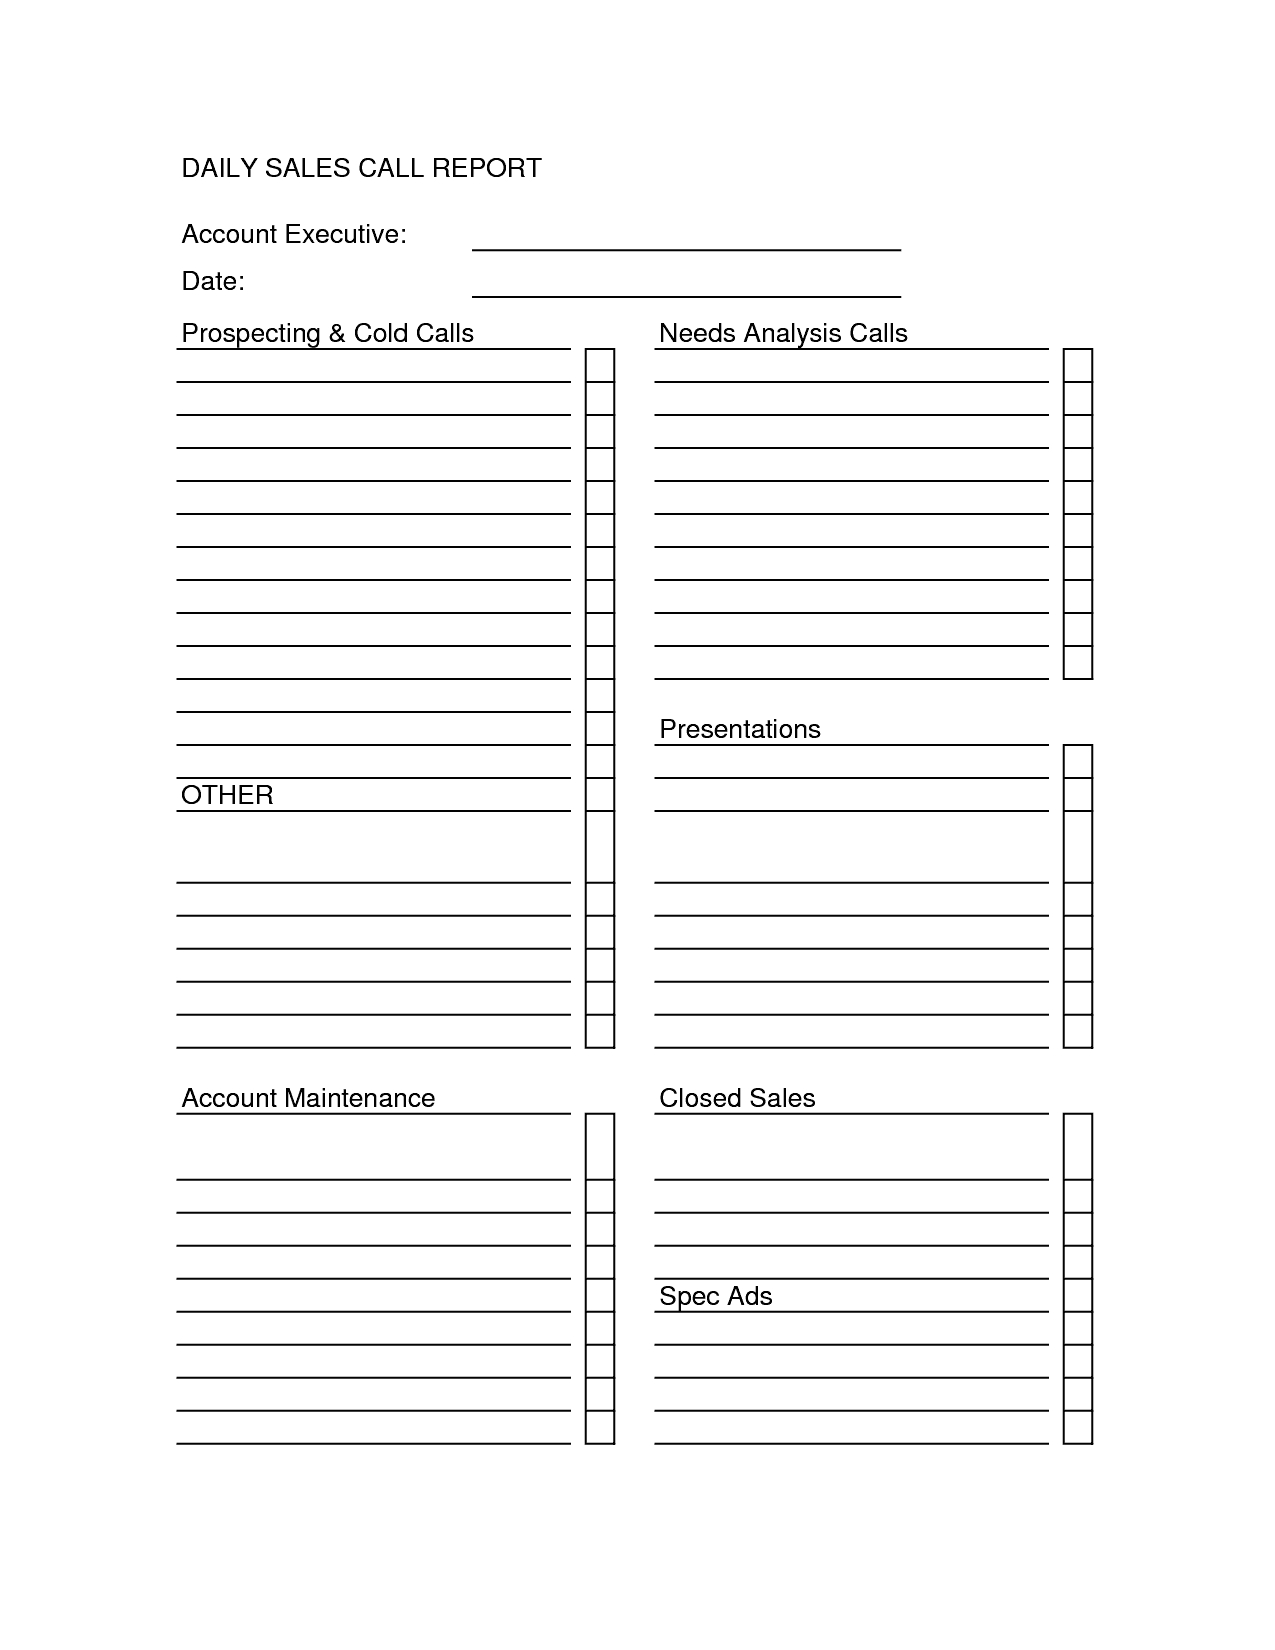 Sales Call Report Templates - Word Excel Fomats With Sales Call Report Template